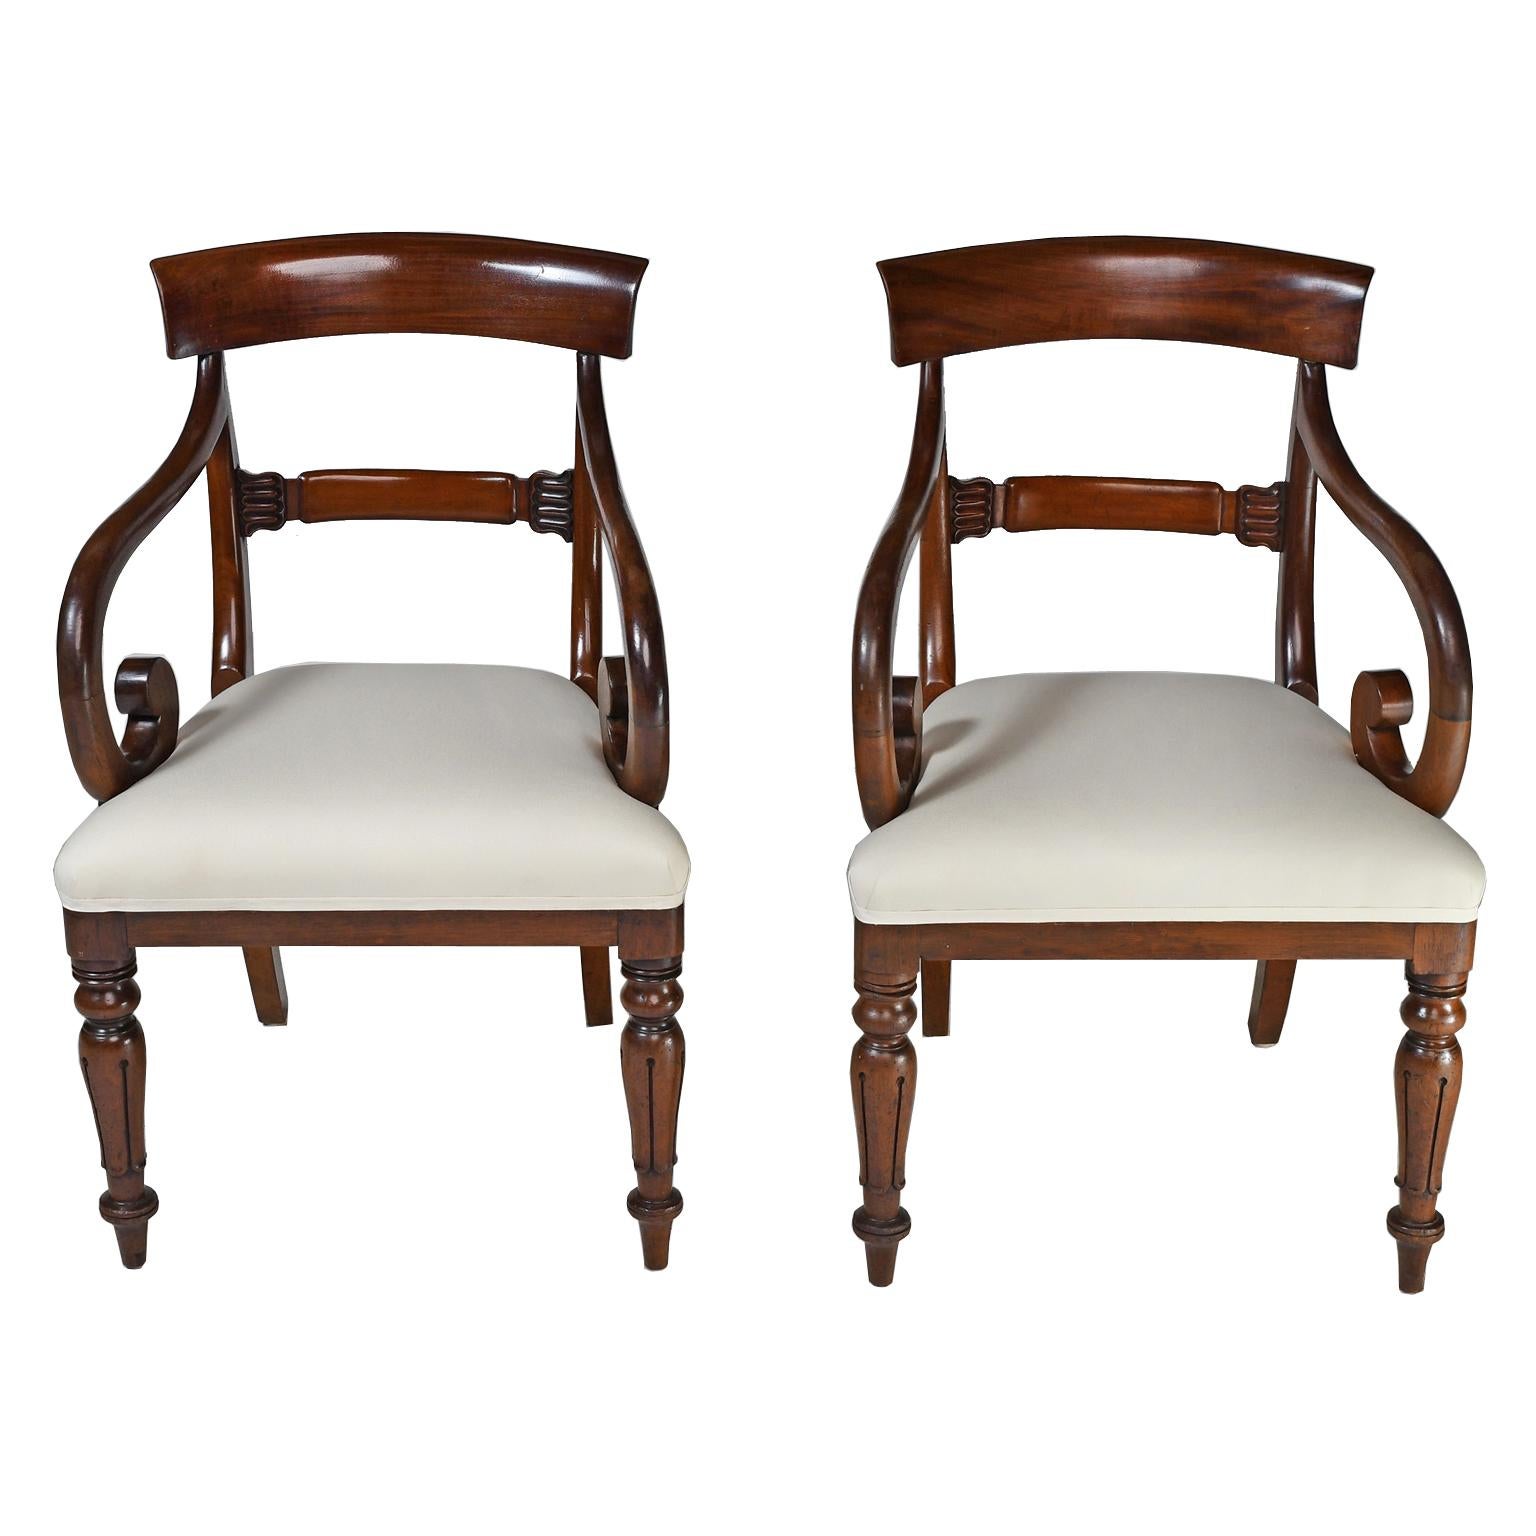 An exceptional set of eight (8) English William IV dining chairs in mahogany, comprising of 2 armchairs and 6 side chairs,  England, circa 1835. Chair design features a higher back than is usual for the time period with concave top rail, carved